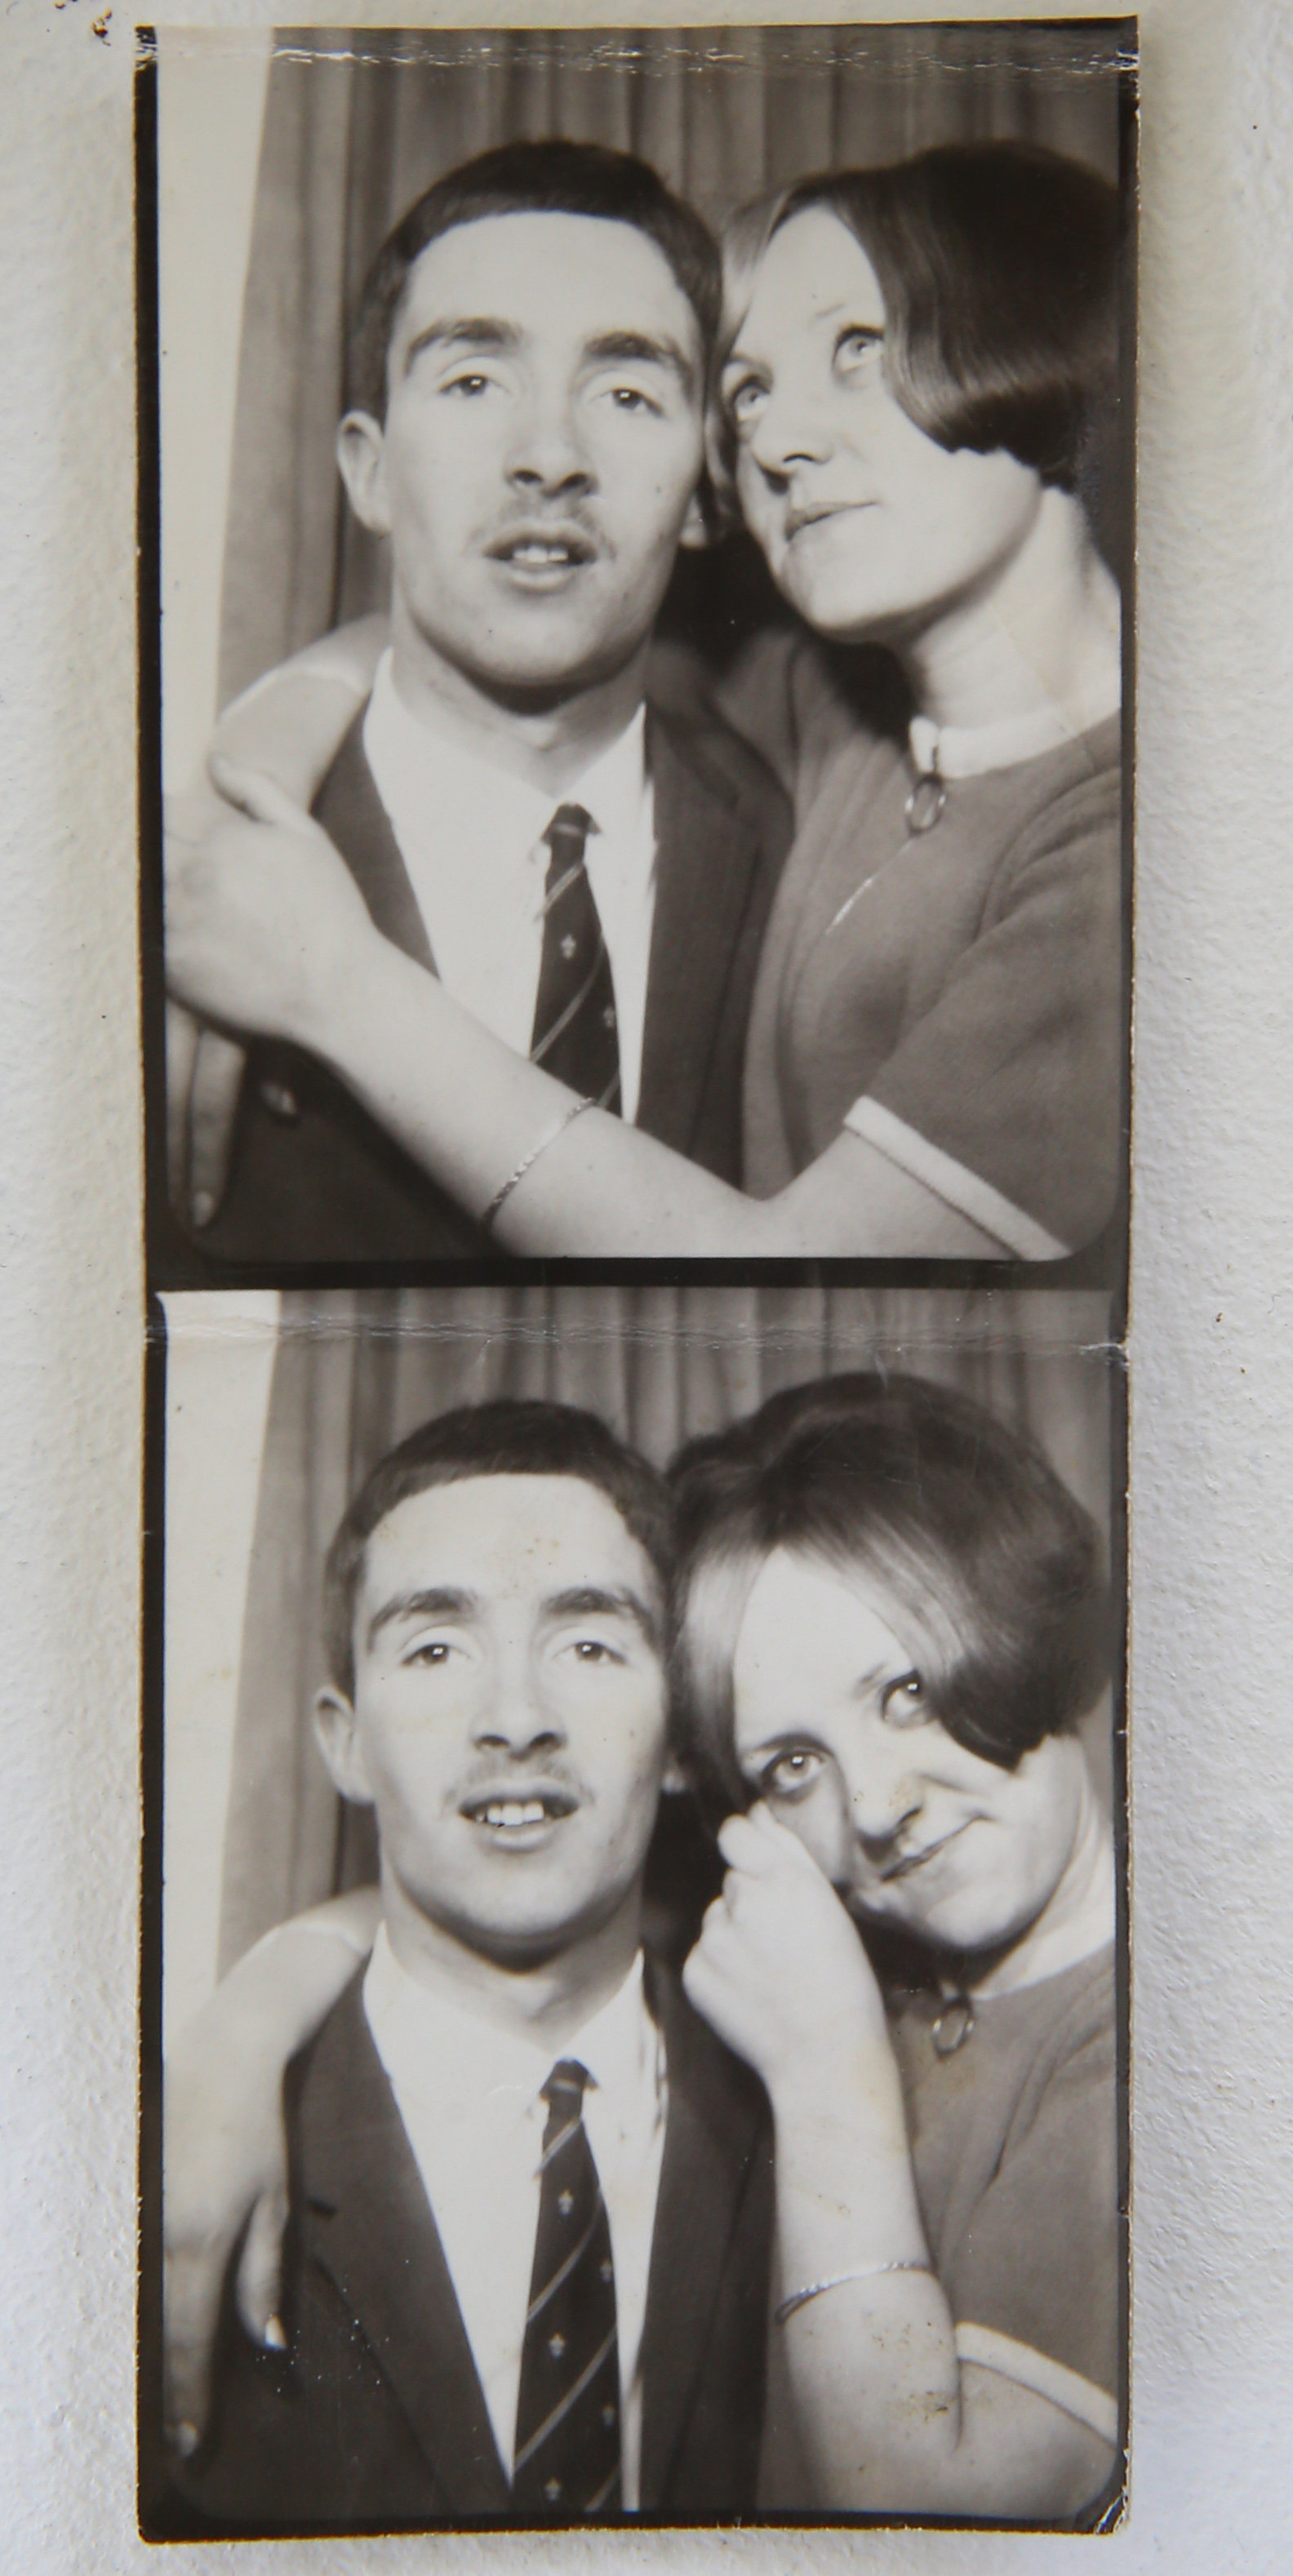 Glasgow Times past feature. Isabel and Brian McNulty pictured on Isabels 17th birthday in 1967... Isabel and Brian McNulty from Milton, Glasgow have been together for 53 years after meeting at school, courting at the dancing, and marrying at 18. ...5